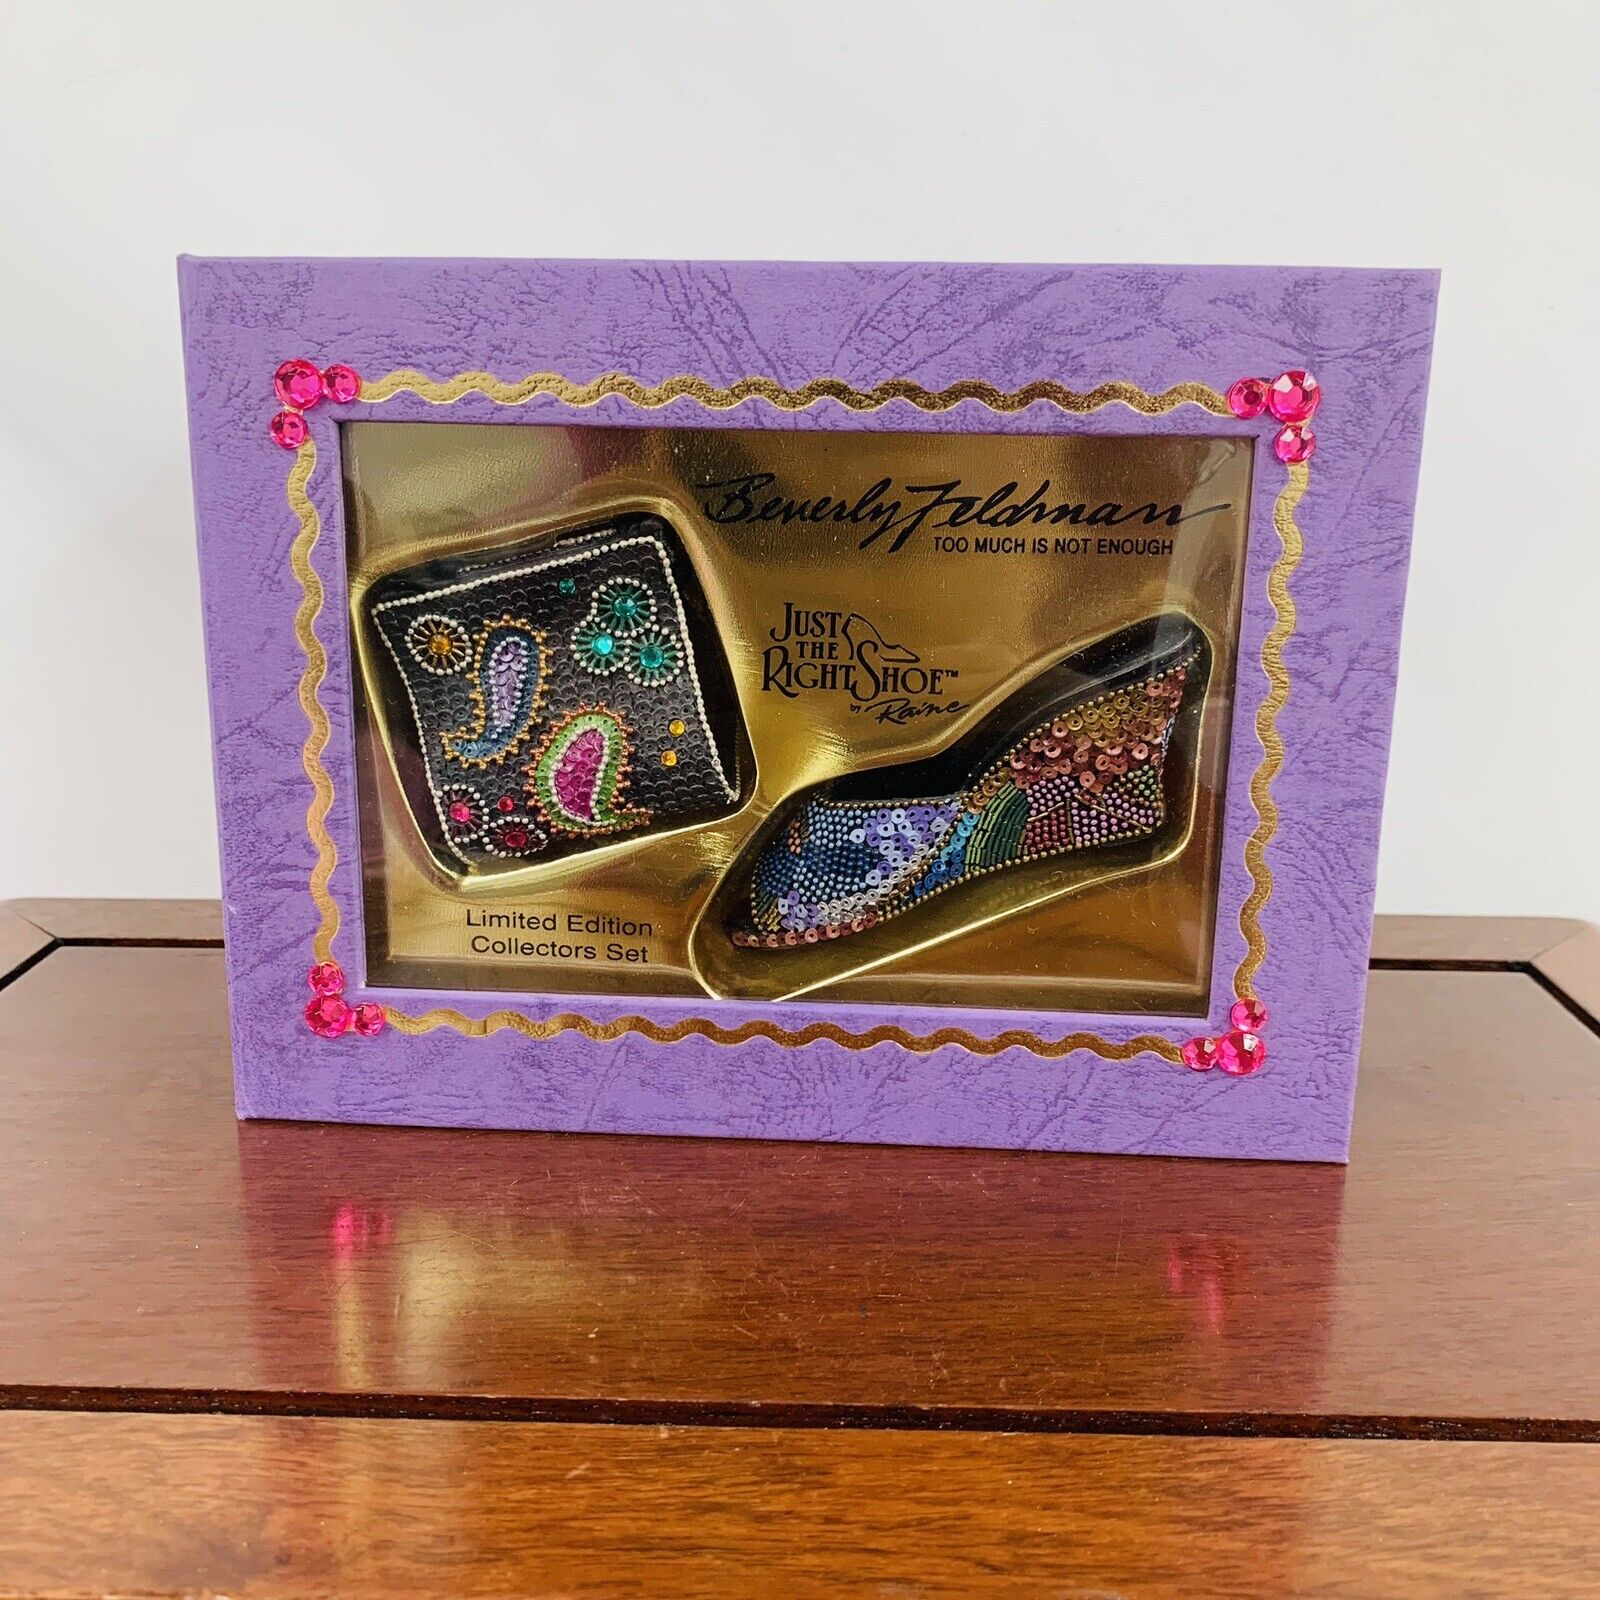 Just the Right Shoe by Beverly Feldman Limited Edition Collector Purse ...